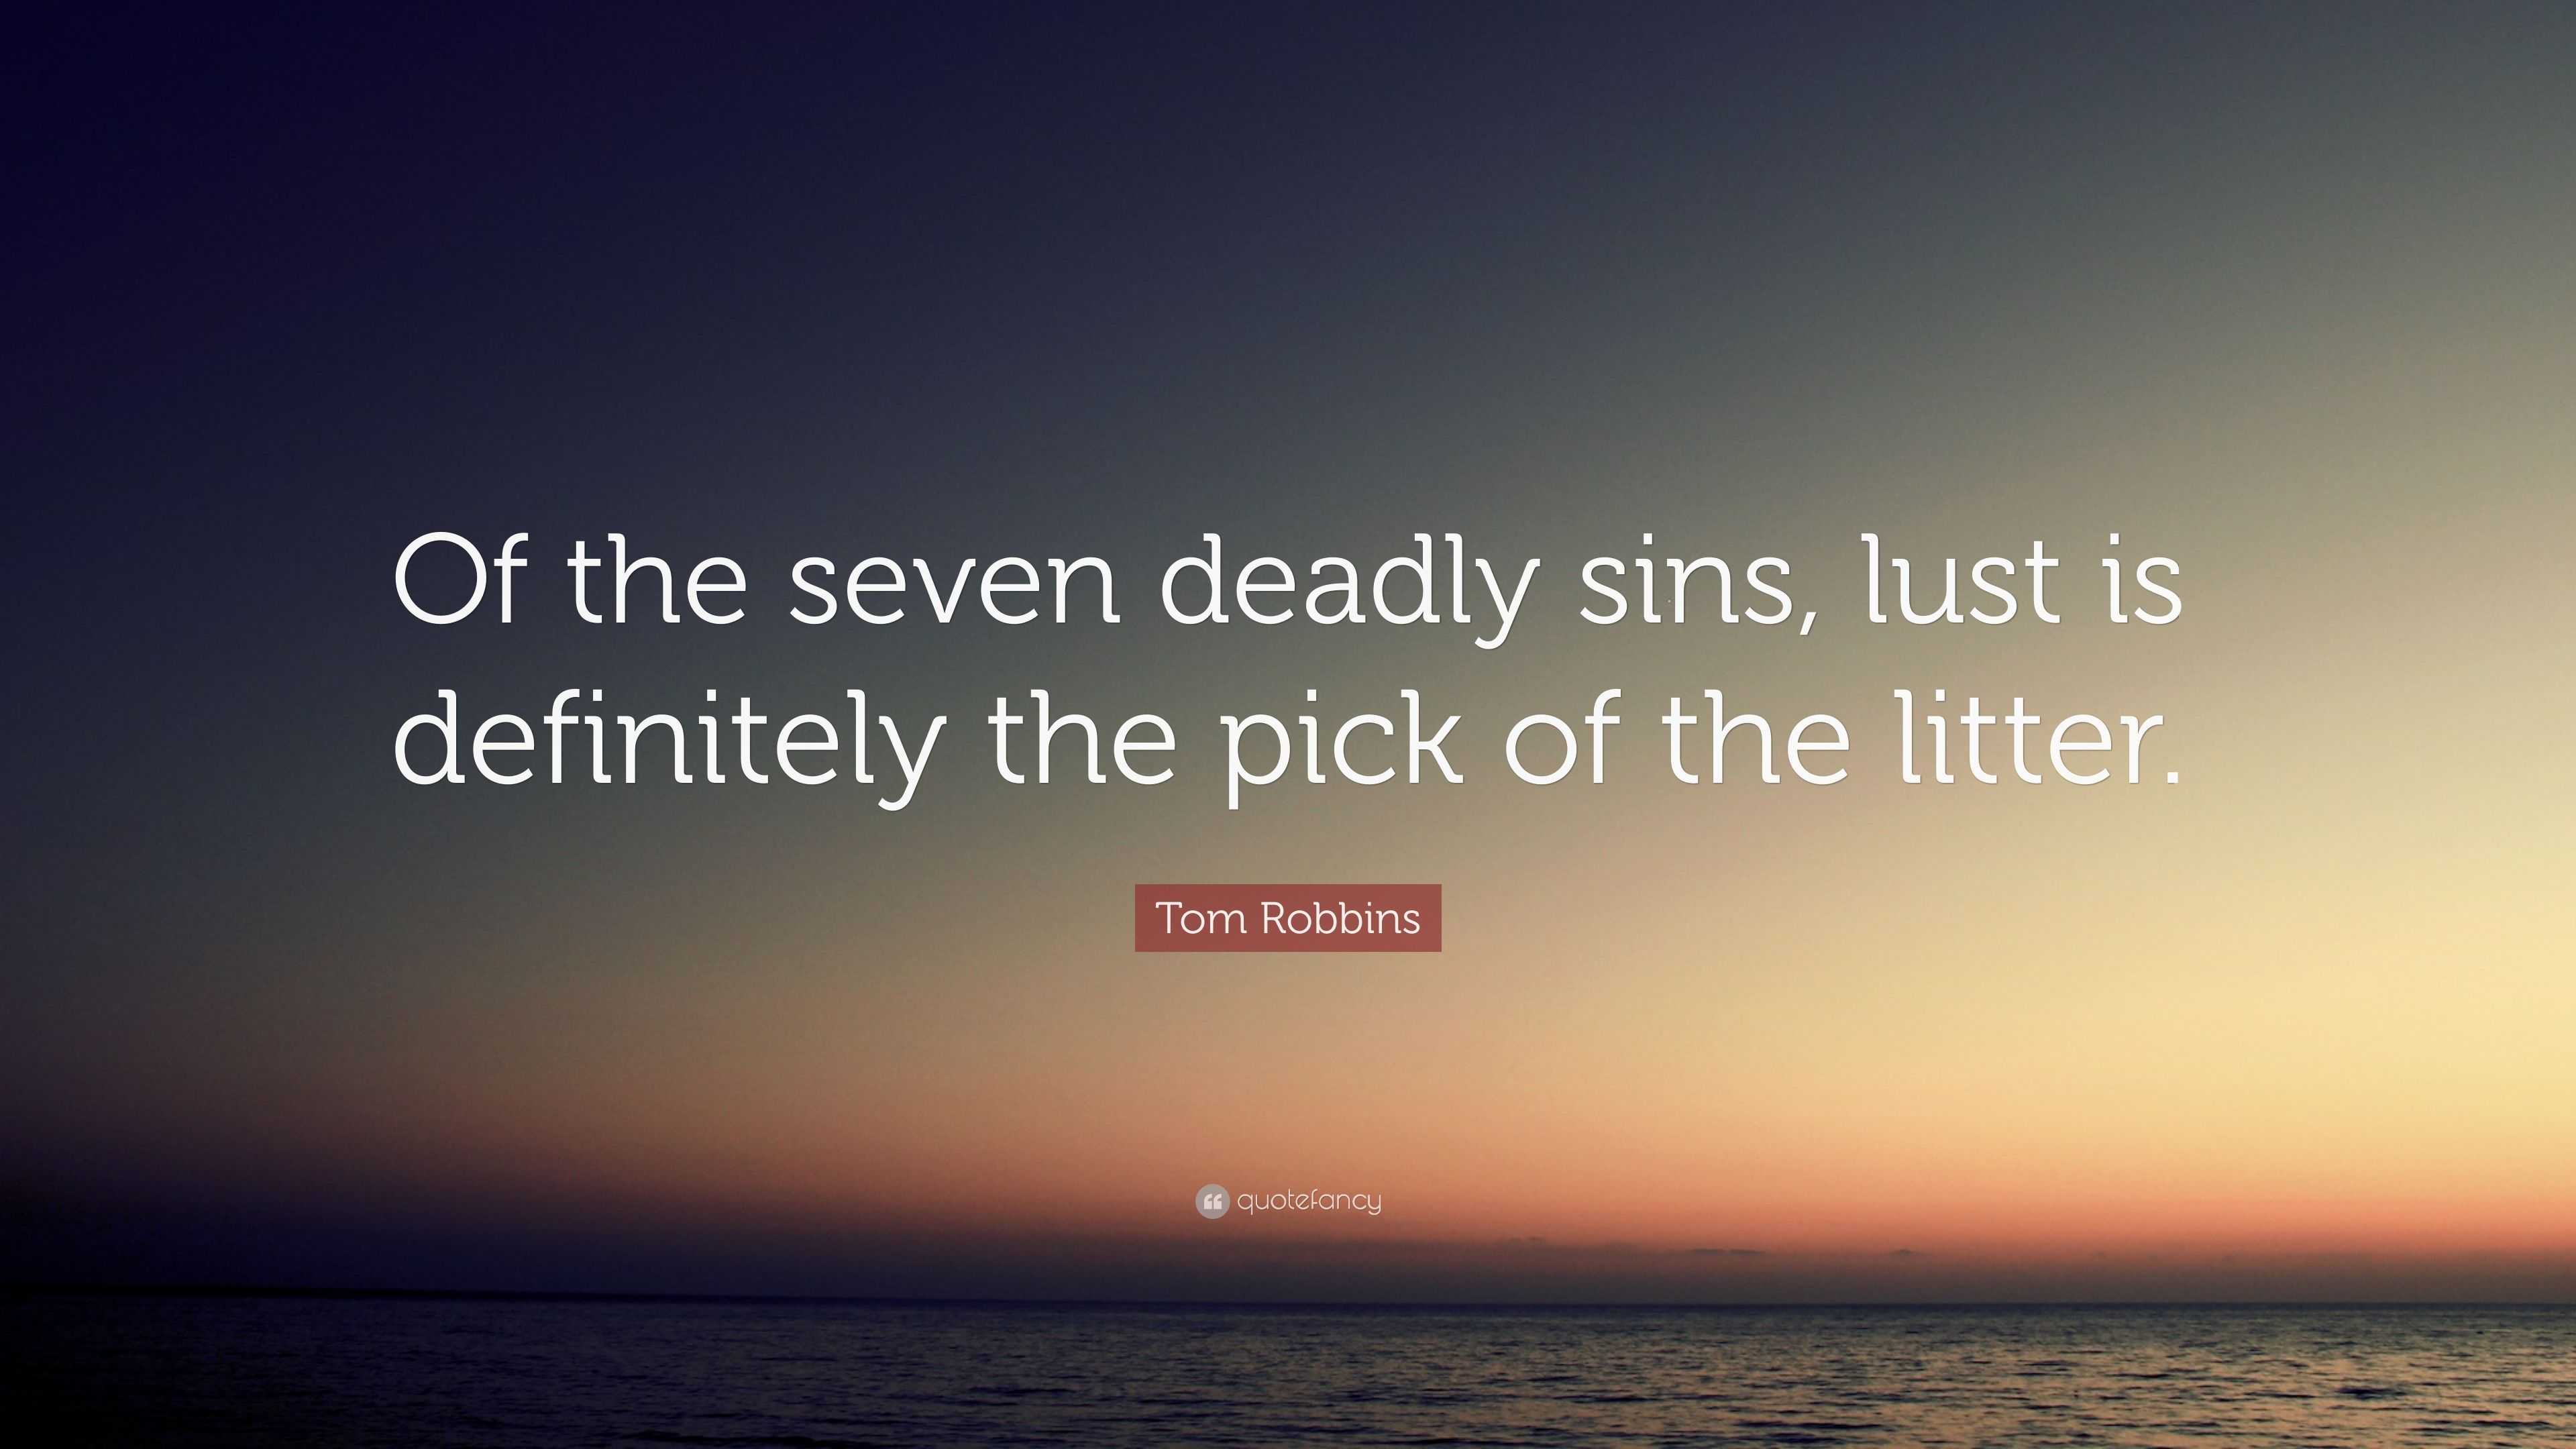 Tom Robbins Quote “of The Seven Deadly Sins Lust Is Definitely The Pick Of The Litter” 